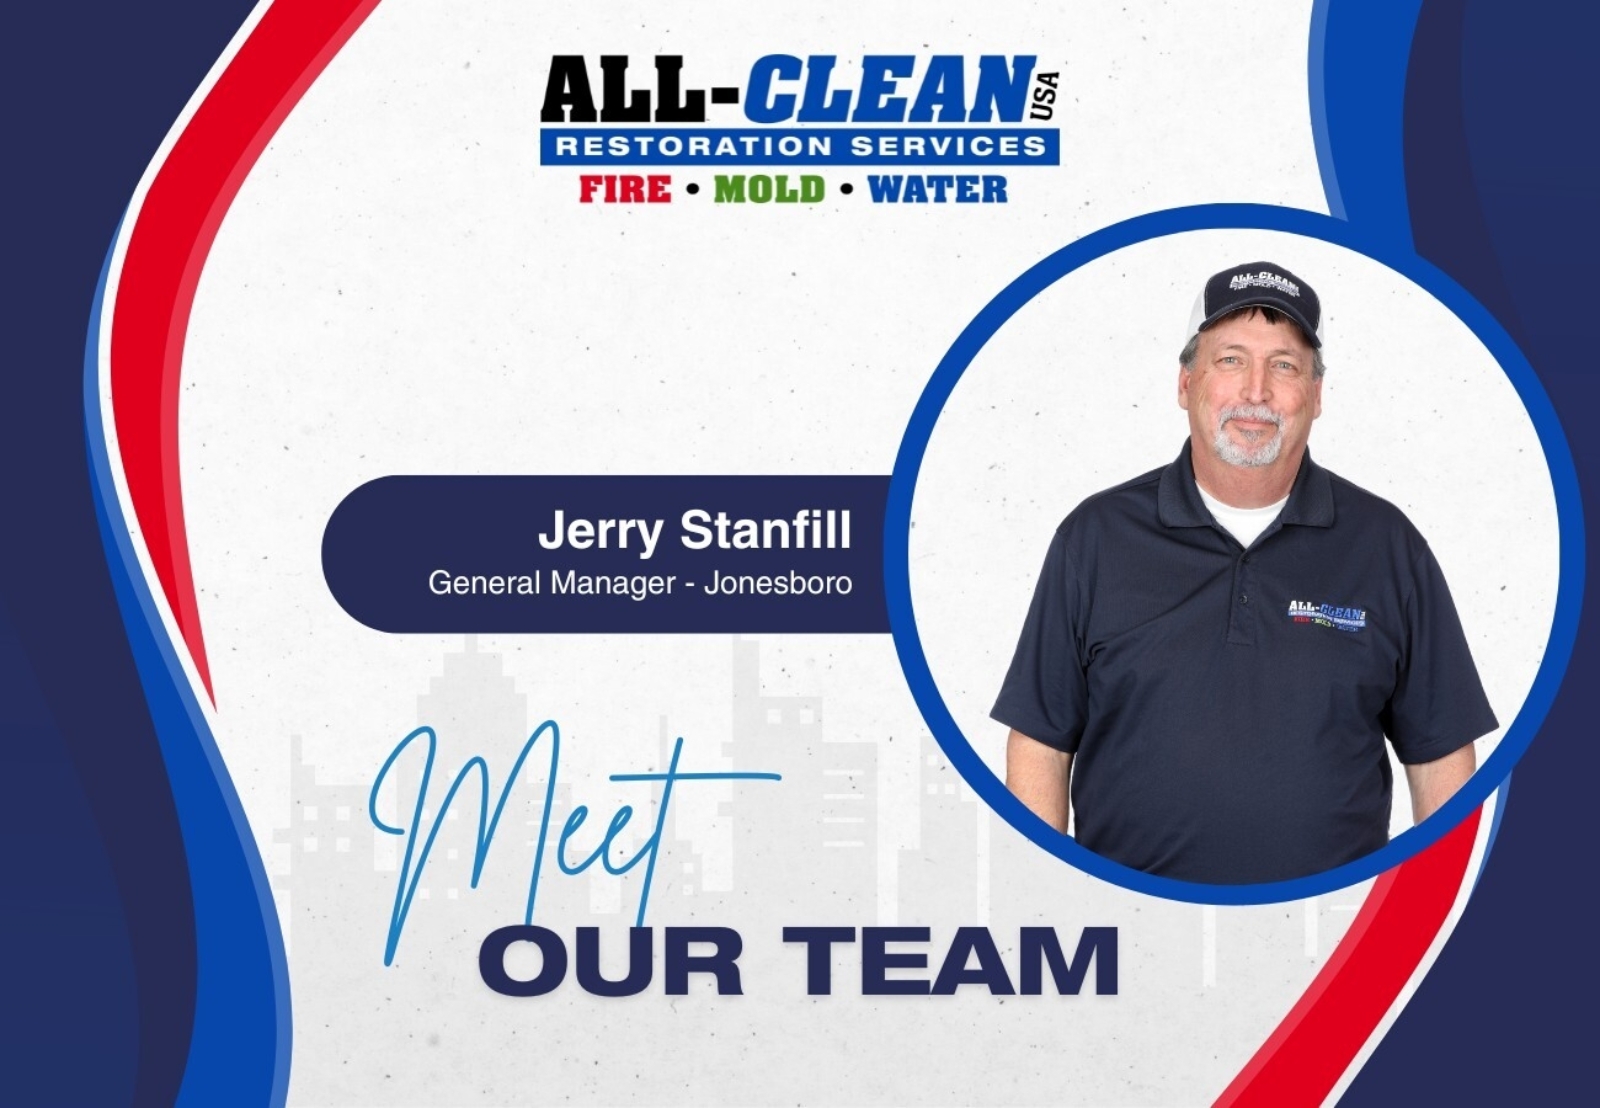 Meet the Team - Introducing Jerry Stanfill